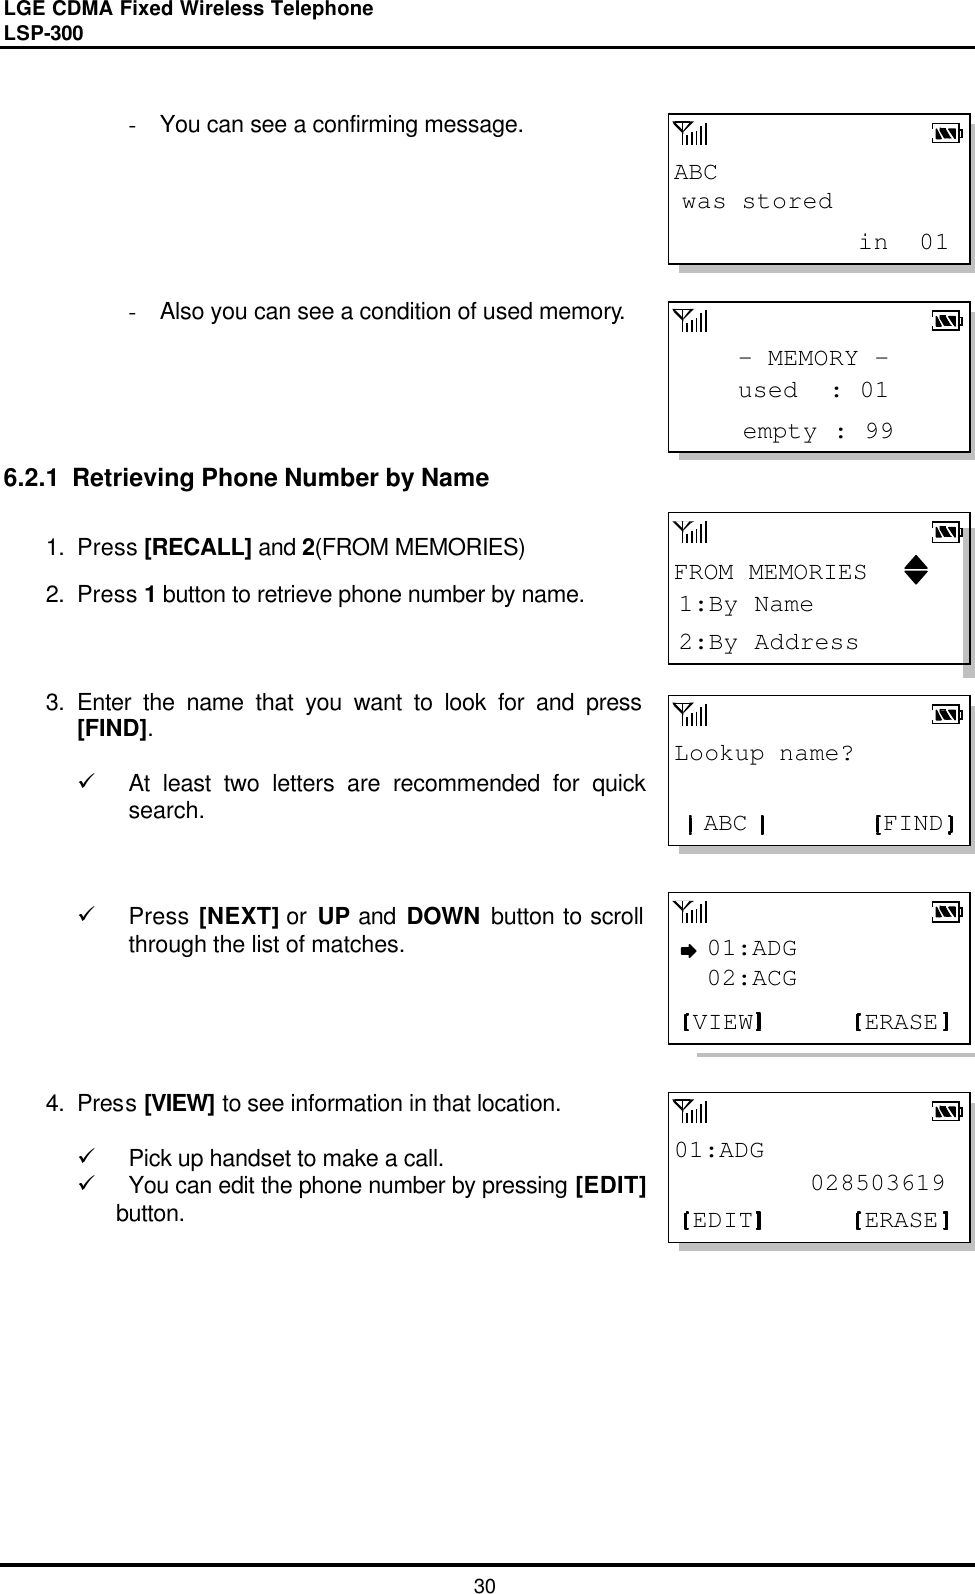 LGE CDMA Fixed Wireless Telephone                                       LSP-300     30 ABCwas stored            in  01- MEMORY -empty : 99used  : 01Lookup name?FINDABC01:ADG         028503619ERASEEDITFROM MEMORIES2:By Address1:By Name01:ADGERASEVIEW02:ACG - You can see a confirming message.       - Also you can see a condition of used memory.      6.2.1  Retrieving Phone Number by Name  1. Press [RECALL] and 2(FROM MEMORIES) 2. Press 1 button to retrieve phone number by name.    3. Enter the name that you want to look for and press [FIND].  ü At least two letters are recommended for quick search.    ü Press [NEXT] or UP and DOWN  button to scroll through the list of matches.       4. Press [VIEW] to see information in that location.   ü Pick up handset to make a call. ü You can edit the phone number by pressing [EDIT] button.             